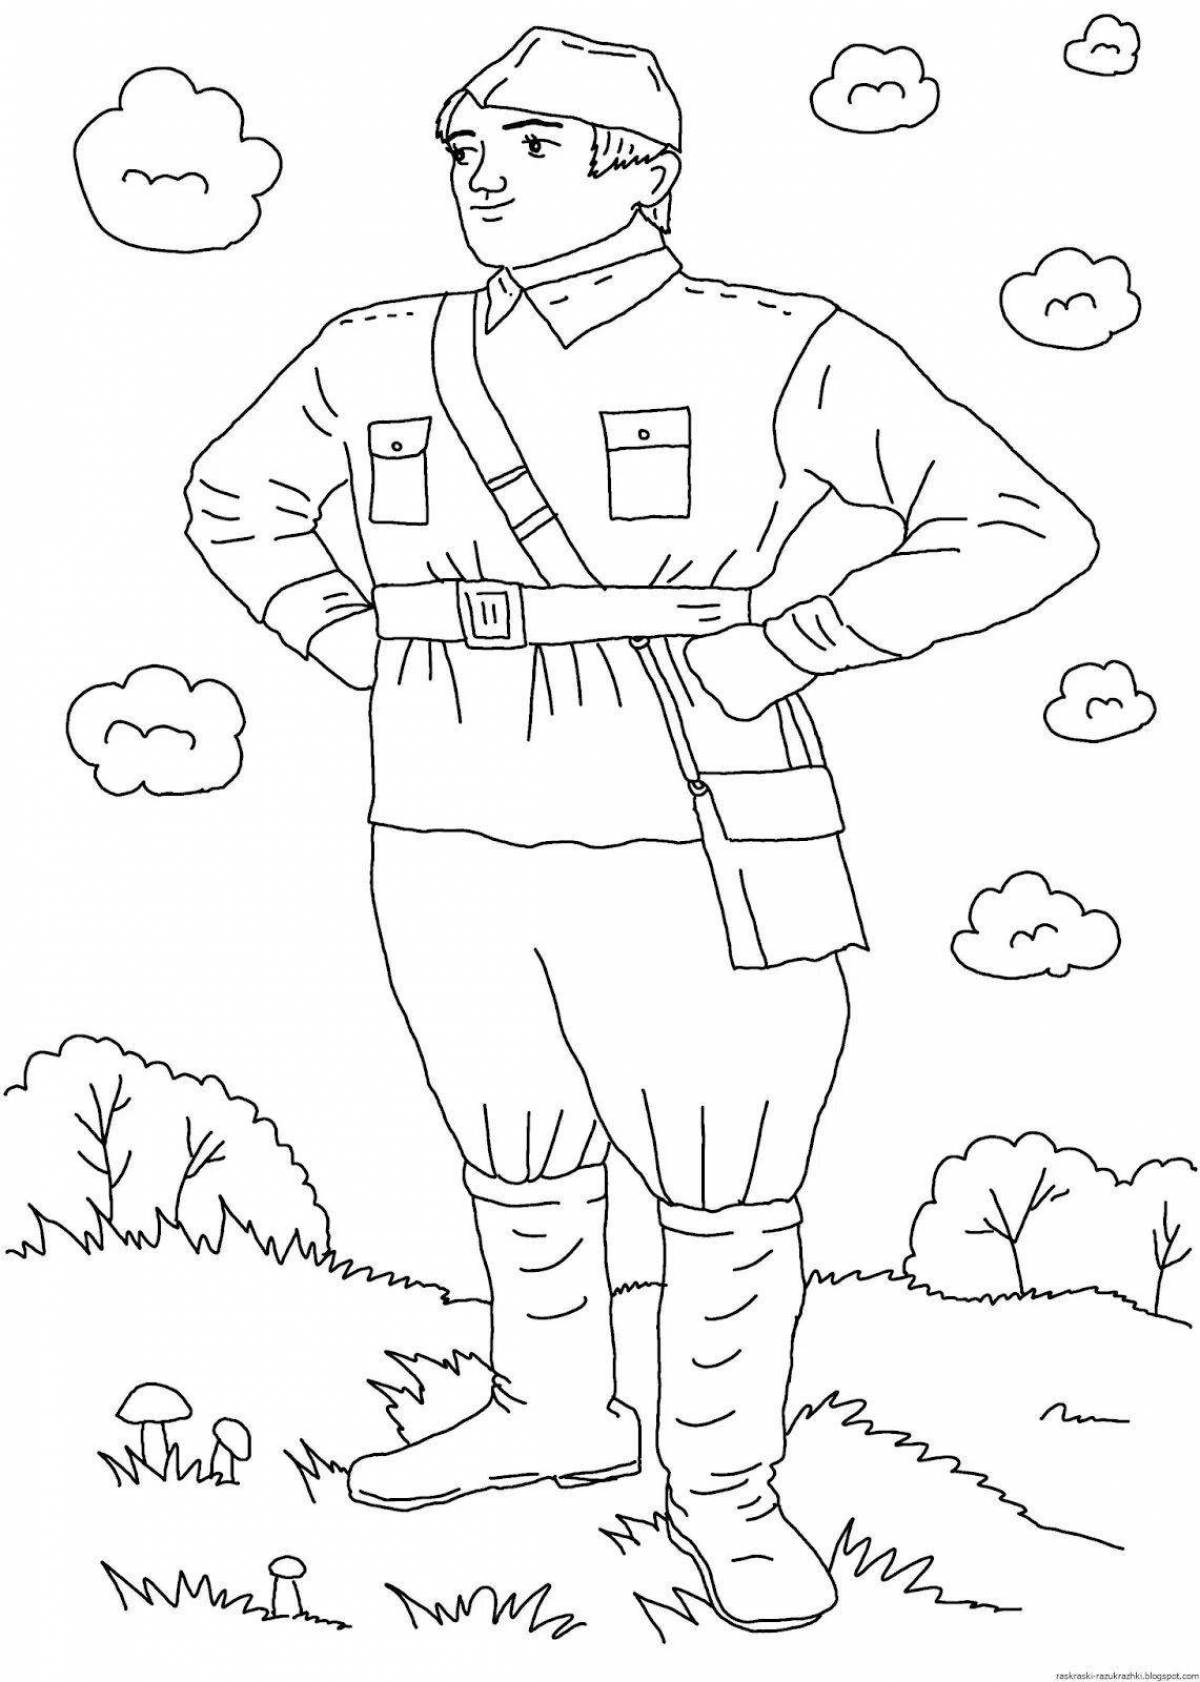 Heroic coloring pages soldiers for boys